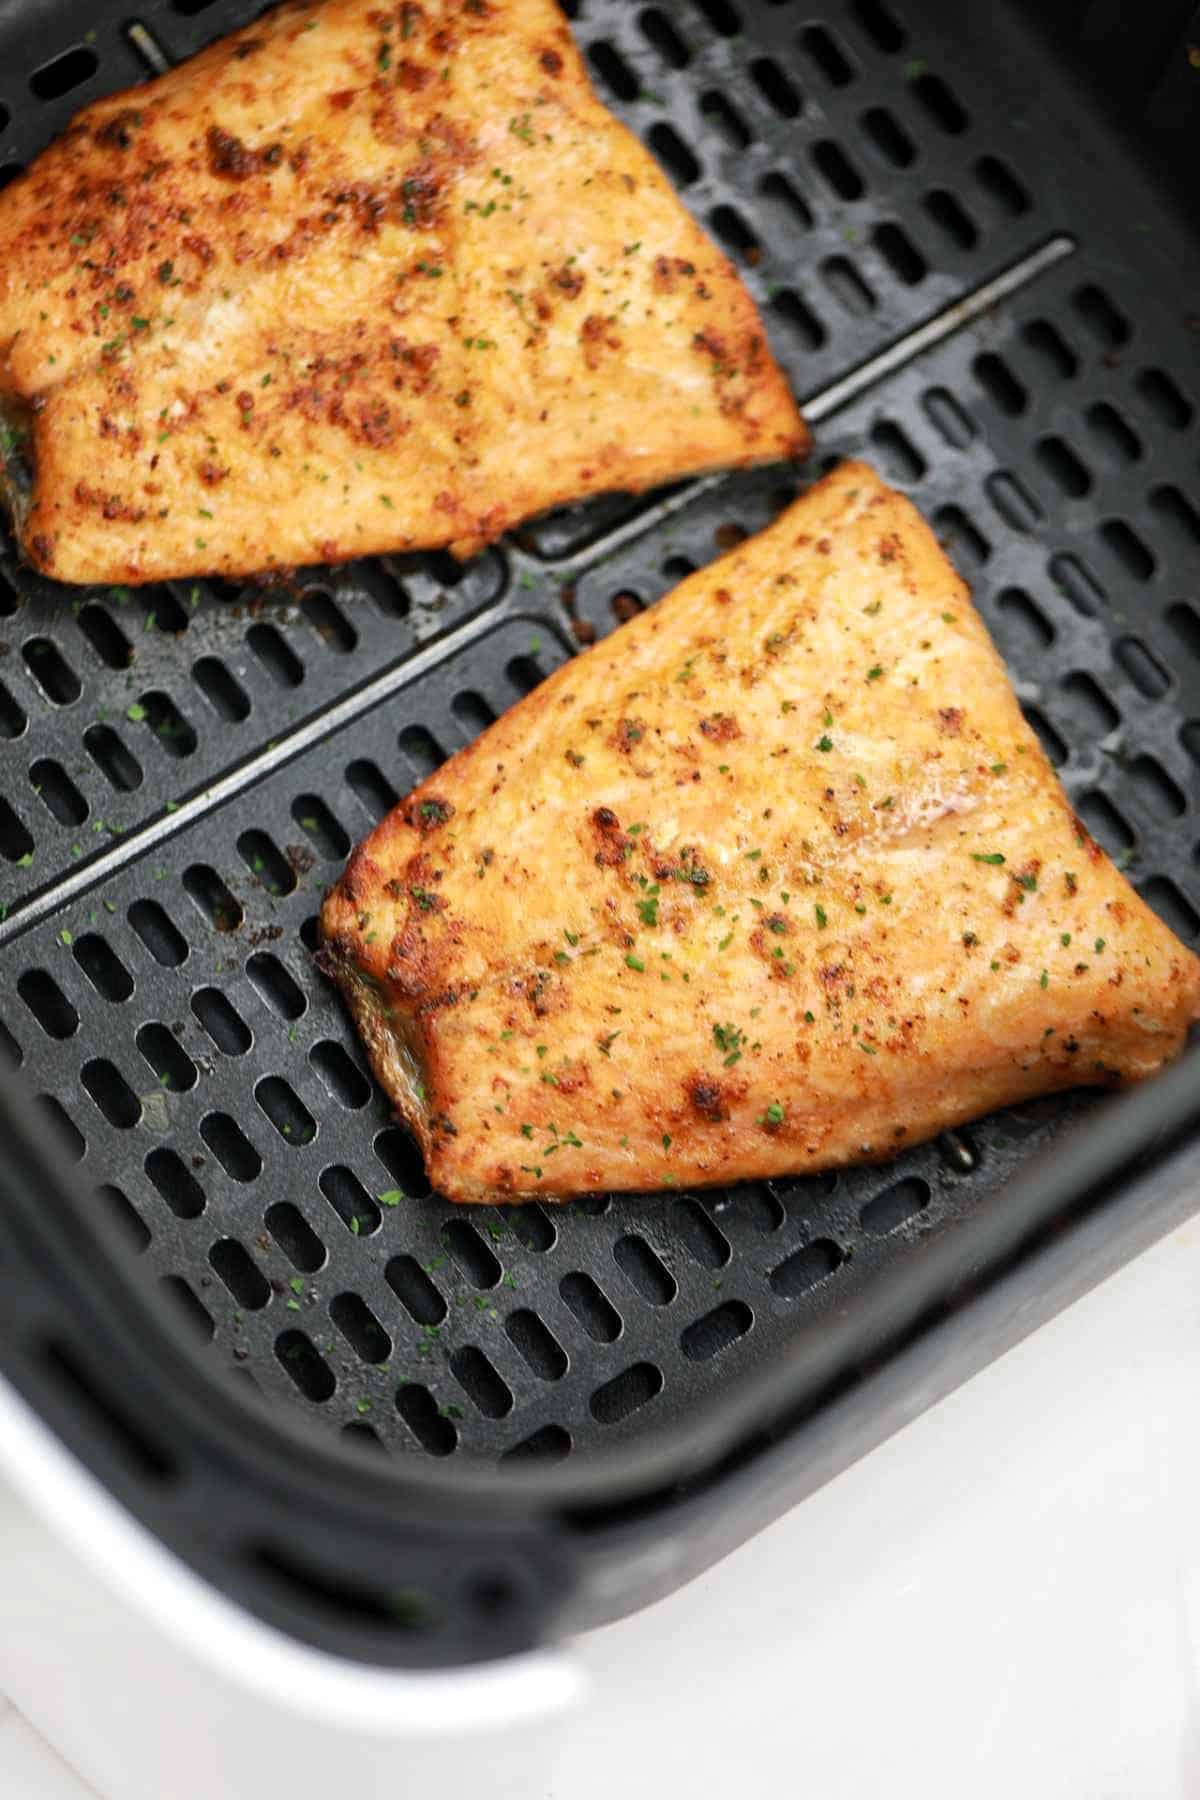 salmon cooked from frozen in air fryer displayed.